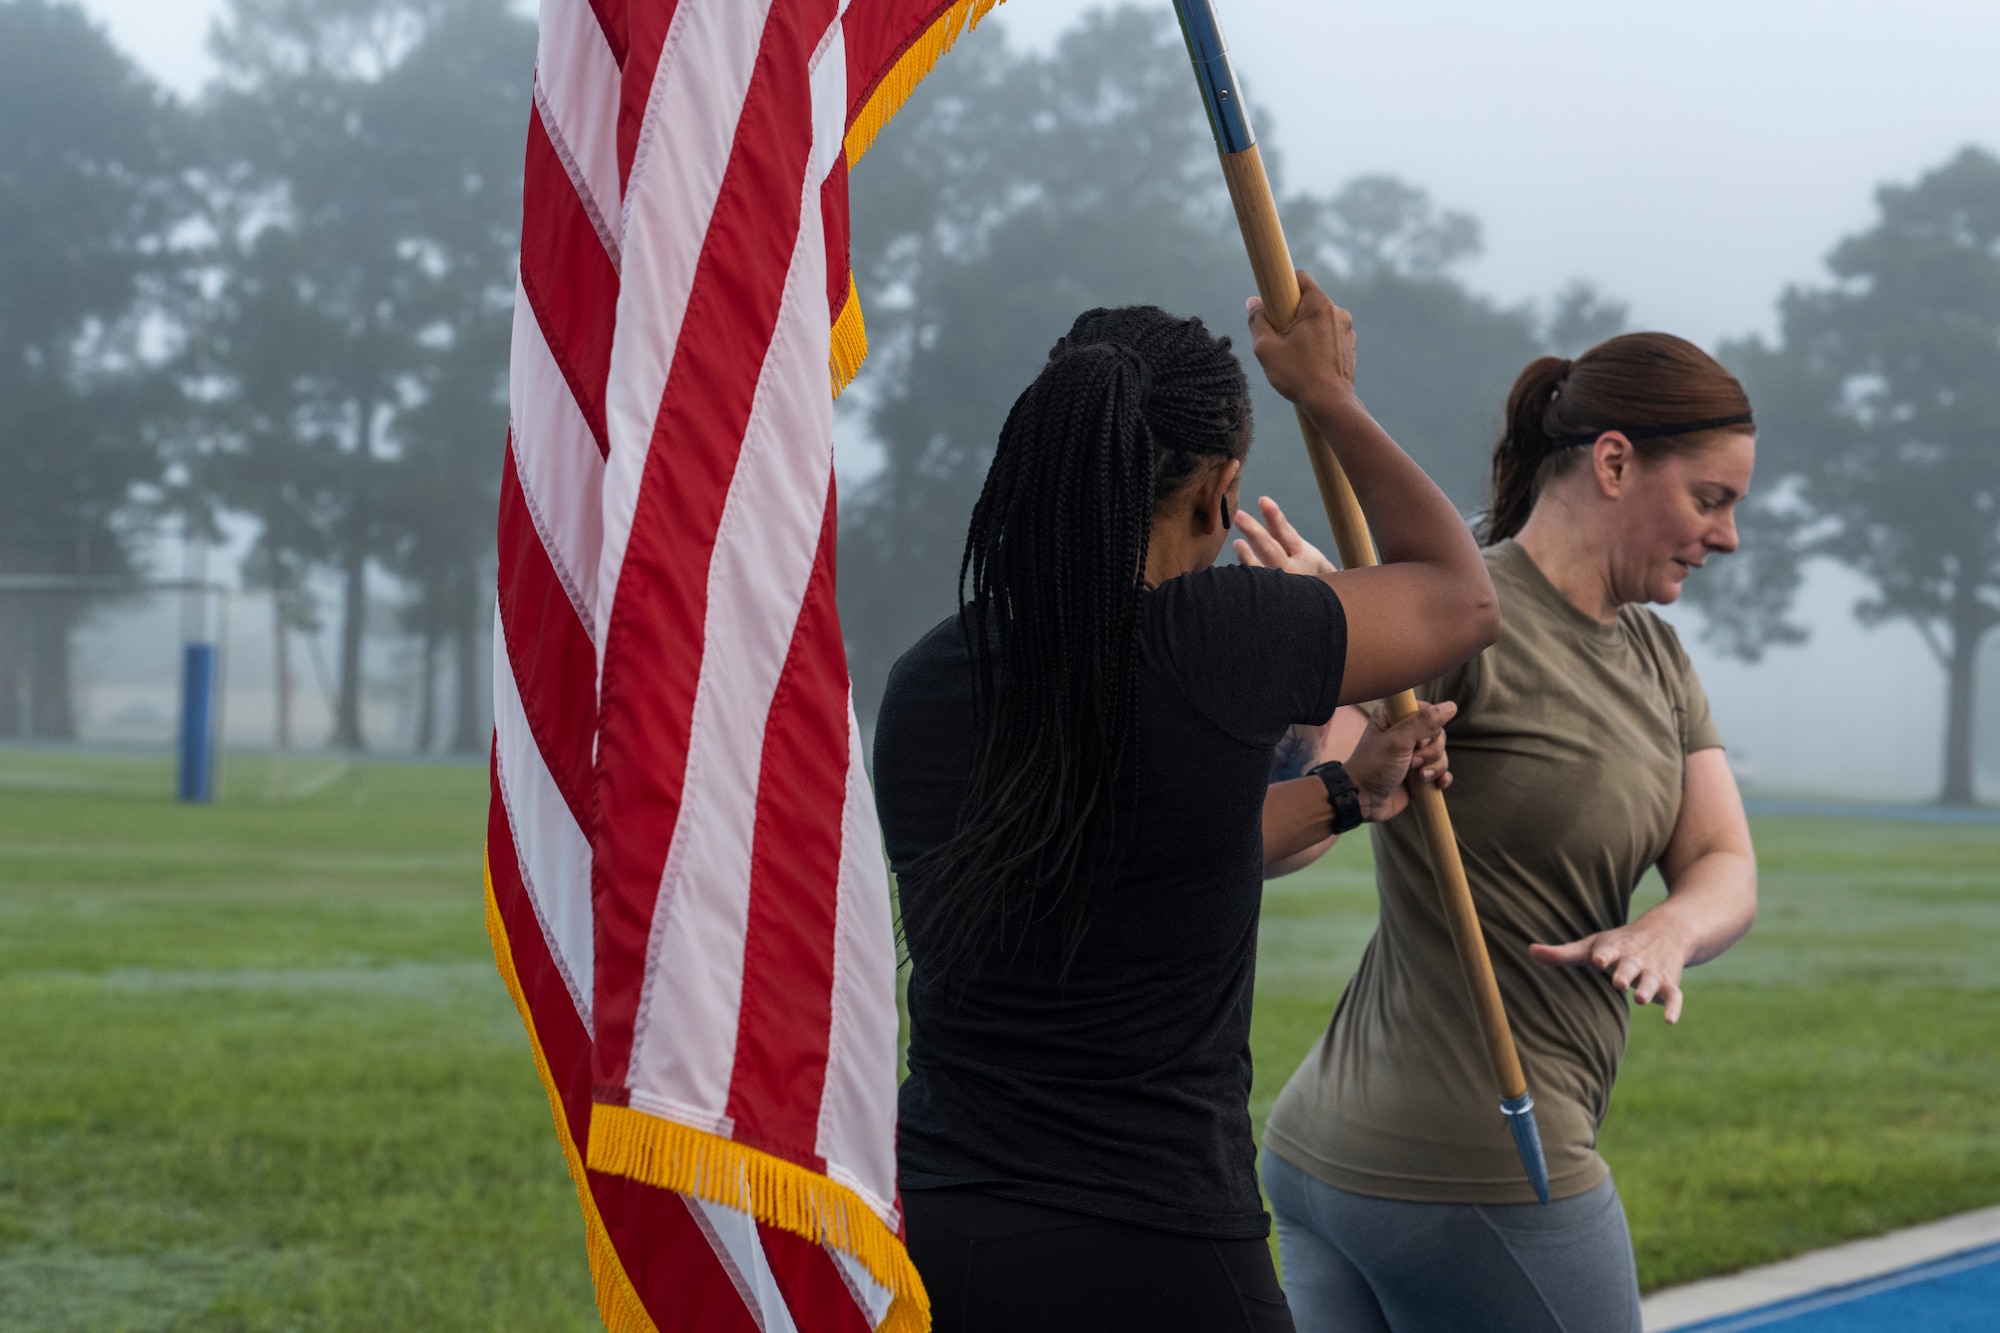 Airman passes a U.S. flag to the next runner